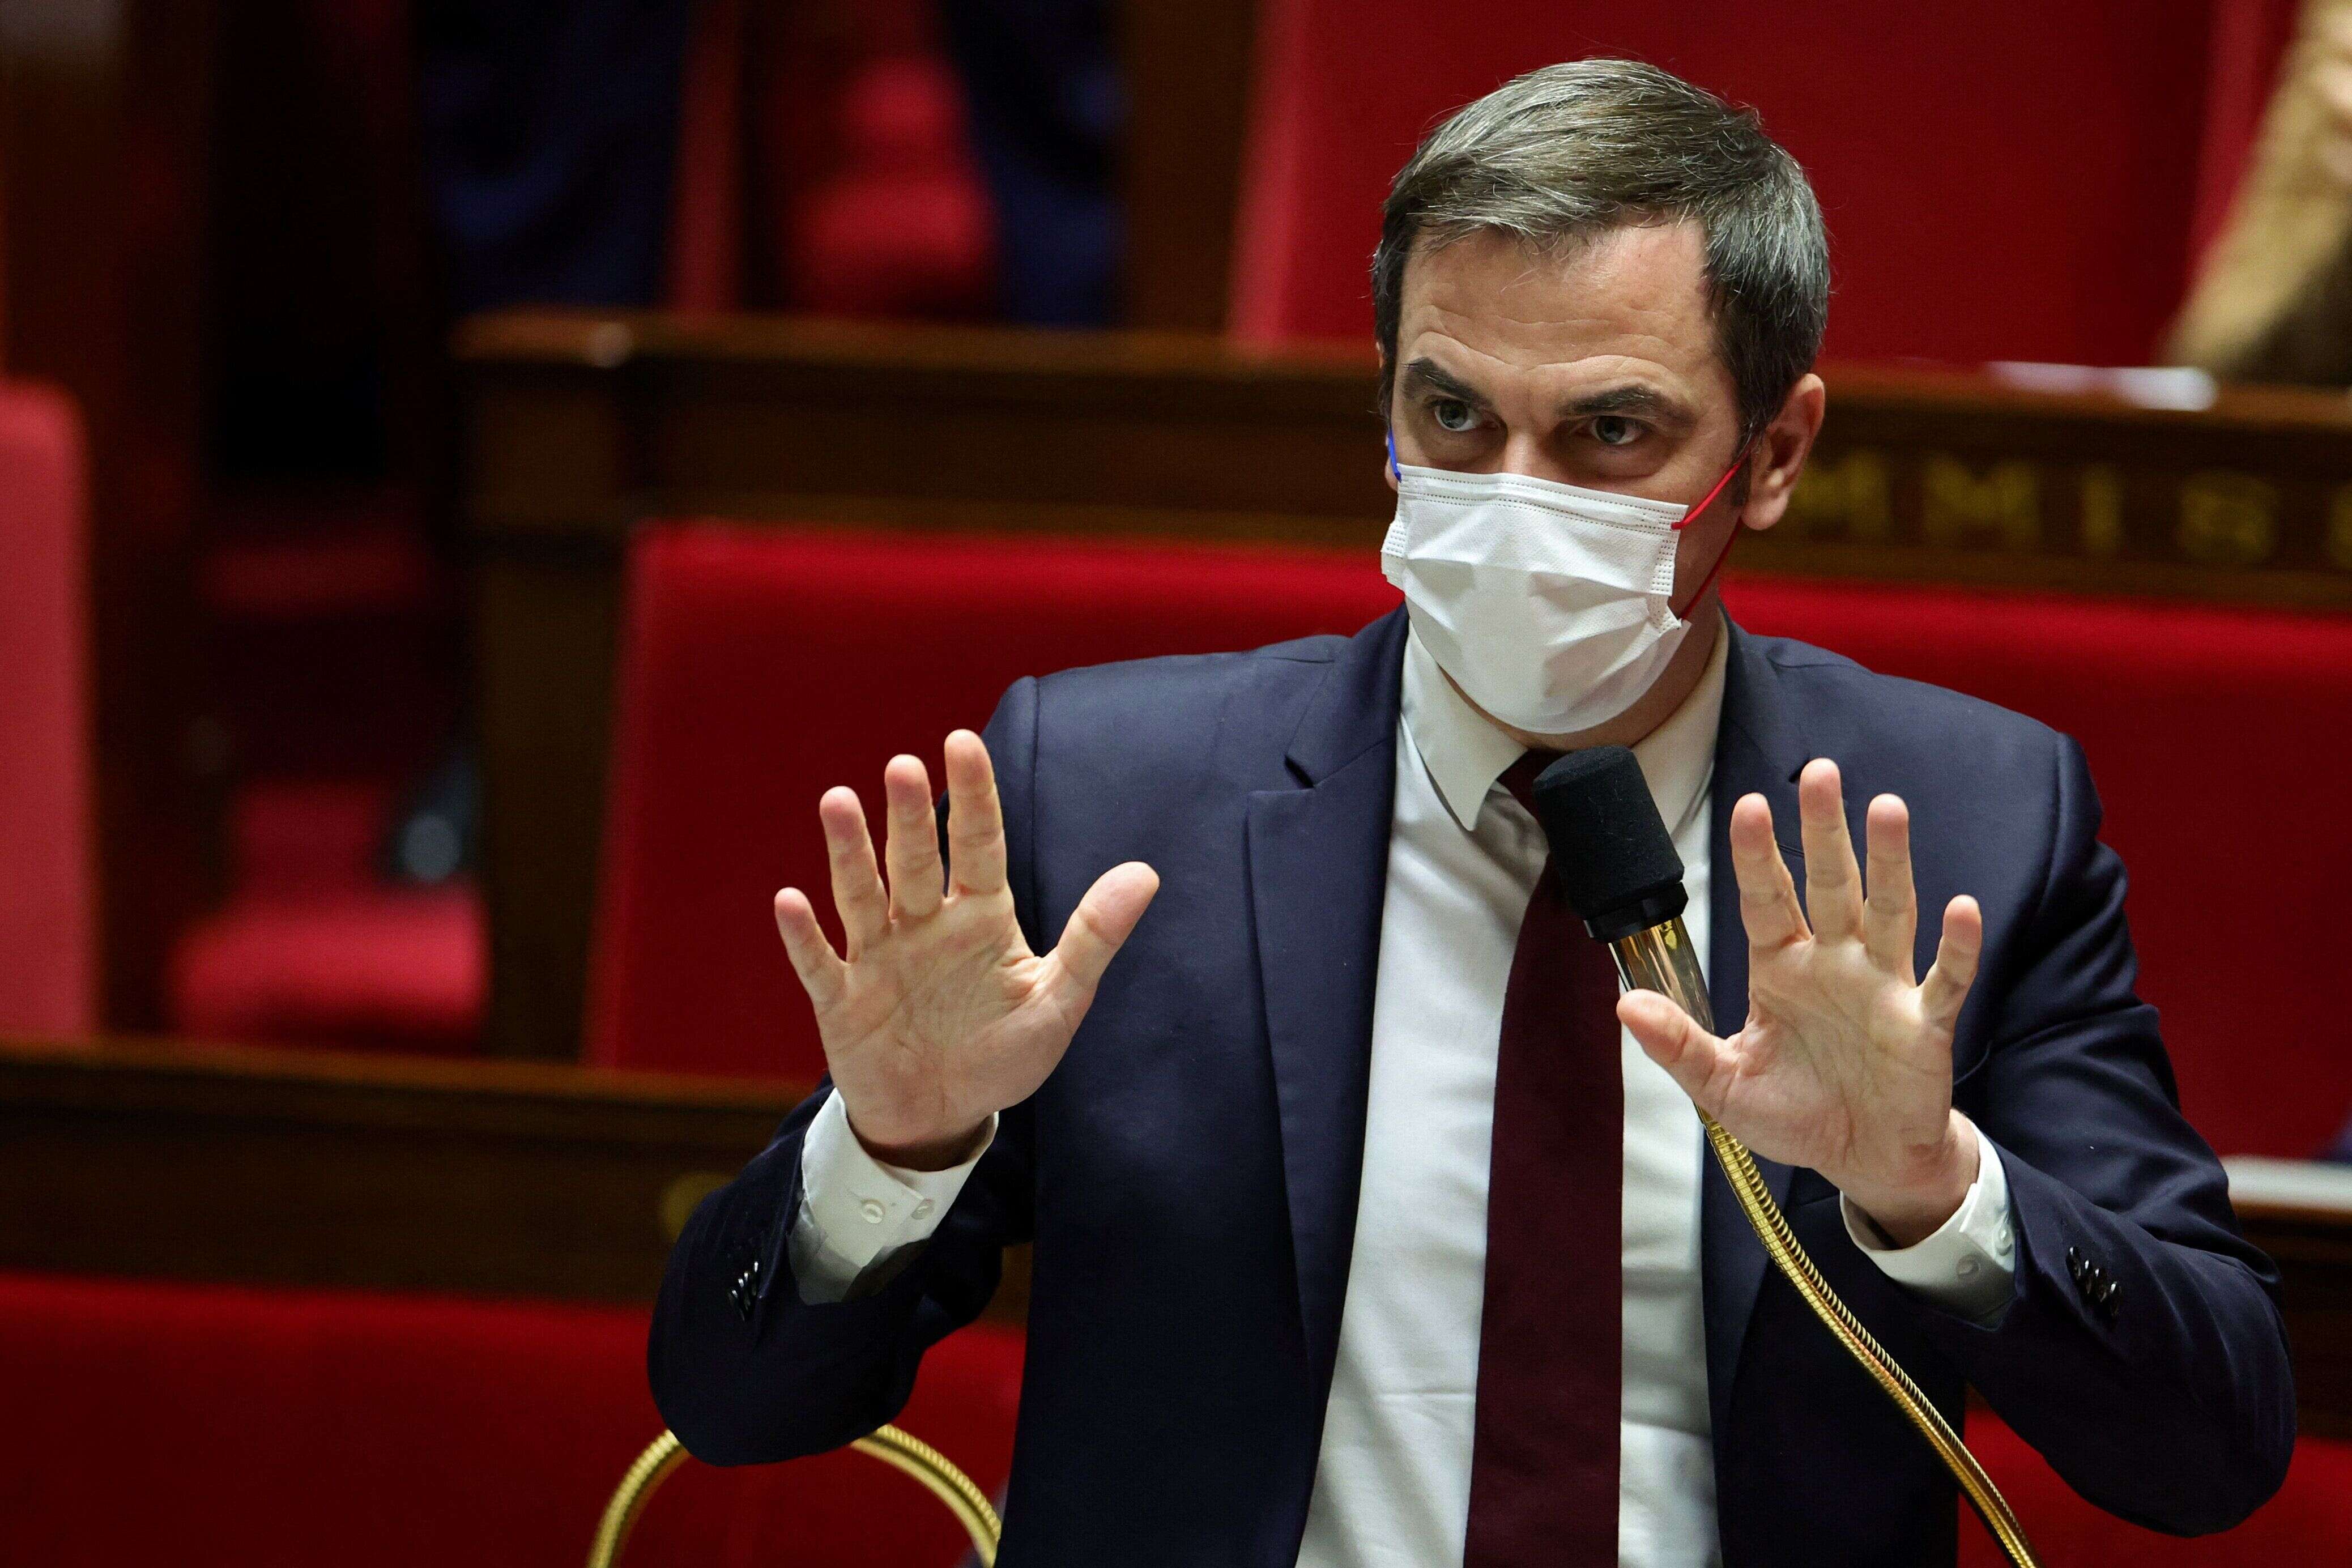 French Health Minister Olivier Veran, wearing a protective face mask, gestures during the opening debate on the French government's planned bill to transform the current health pass into a vaccine pass, at the National Assembly in Paris, France, January 3, 2022. REUTERS/Sarah Meyssonnier